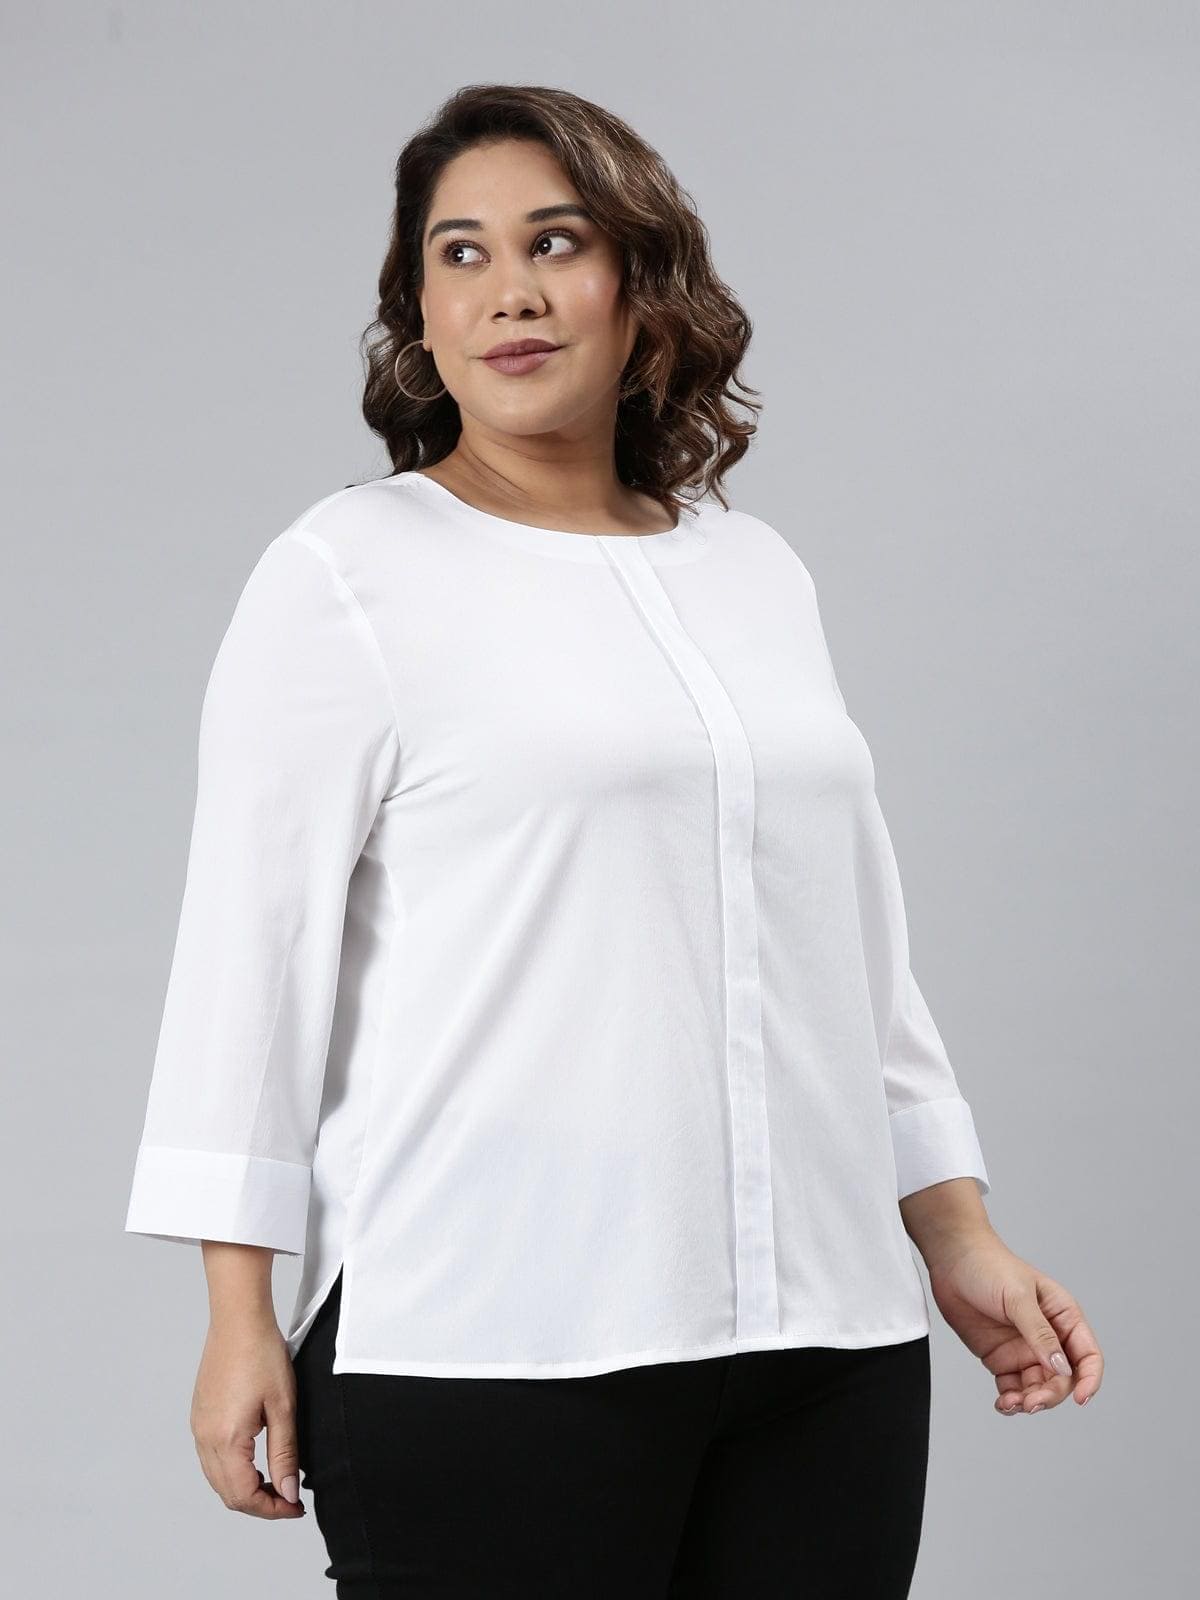 buy TheShaili crepe white tops at best prices   India